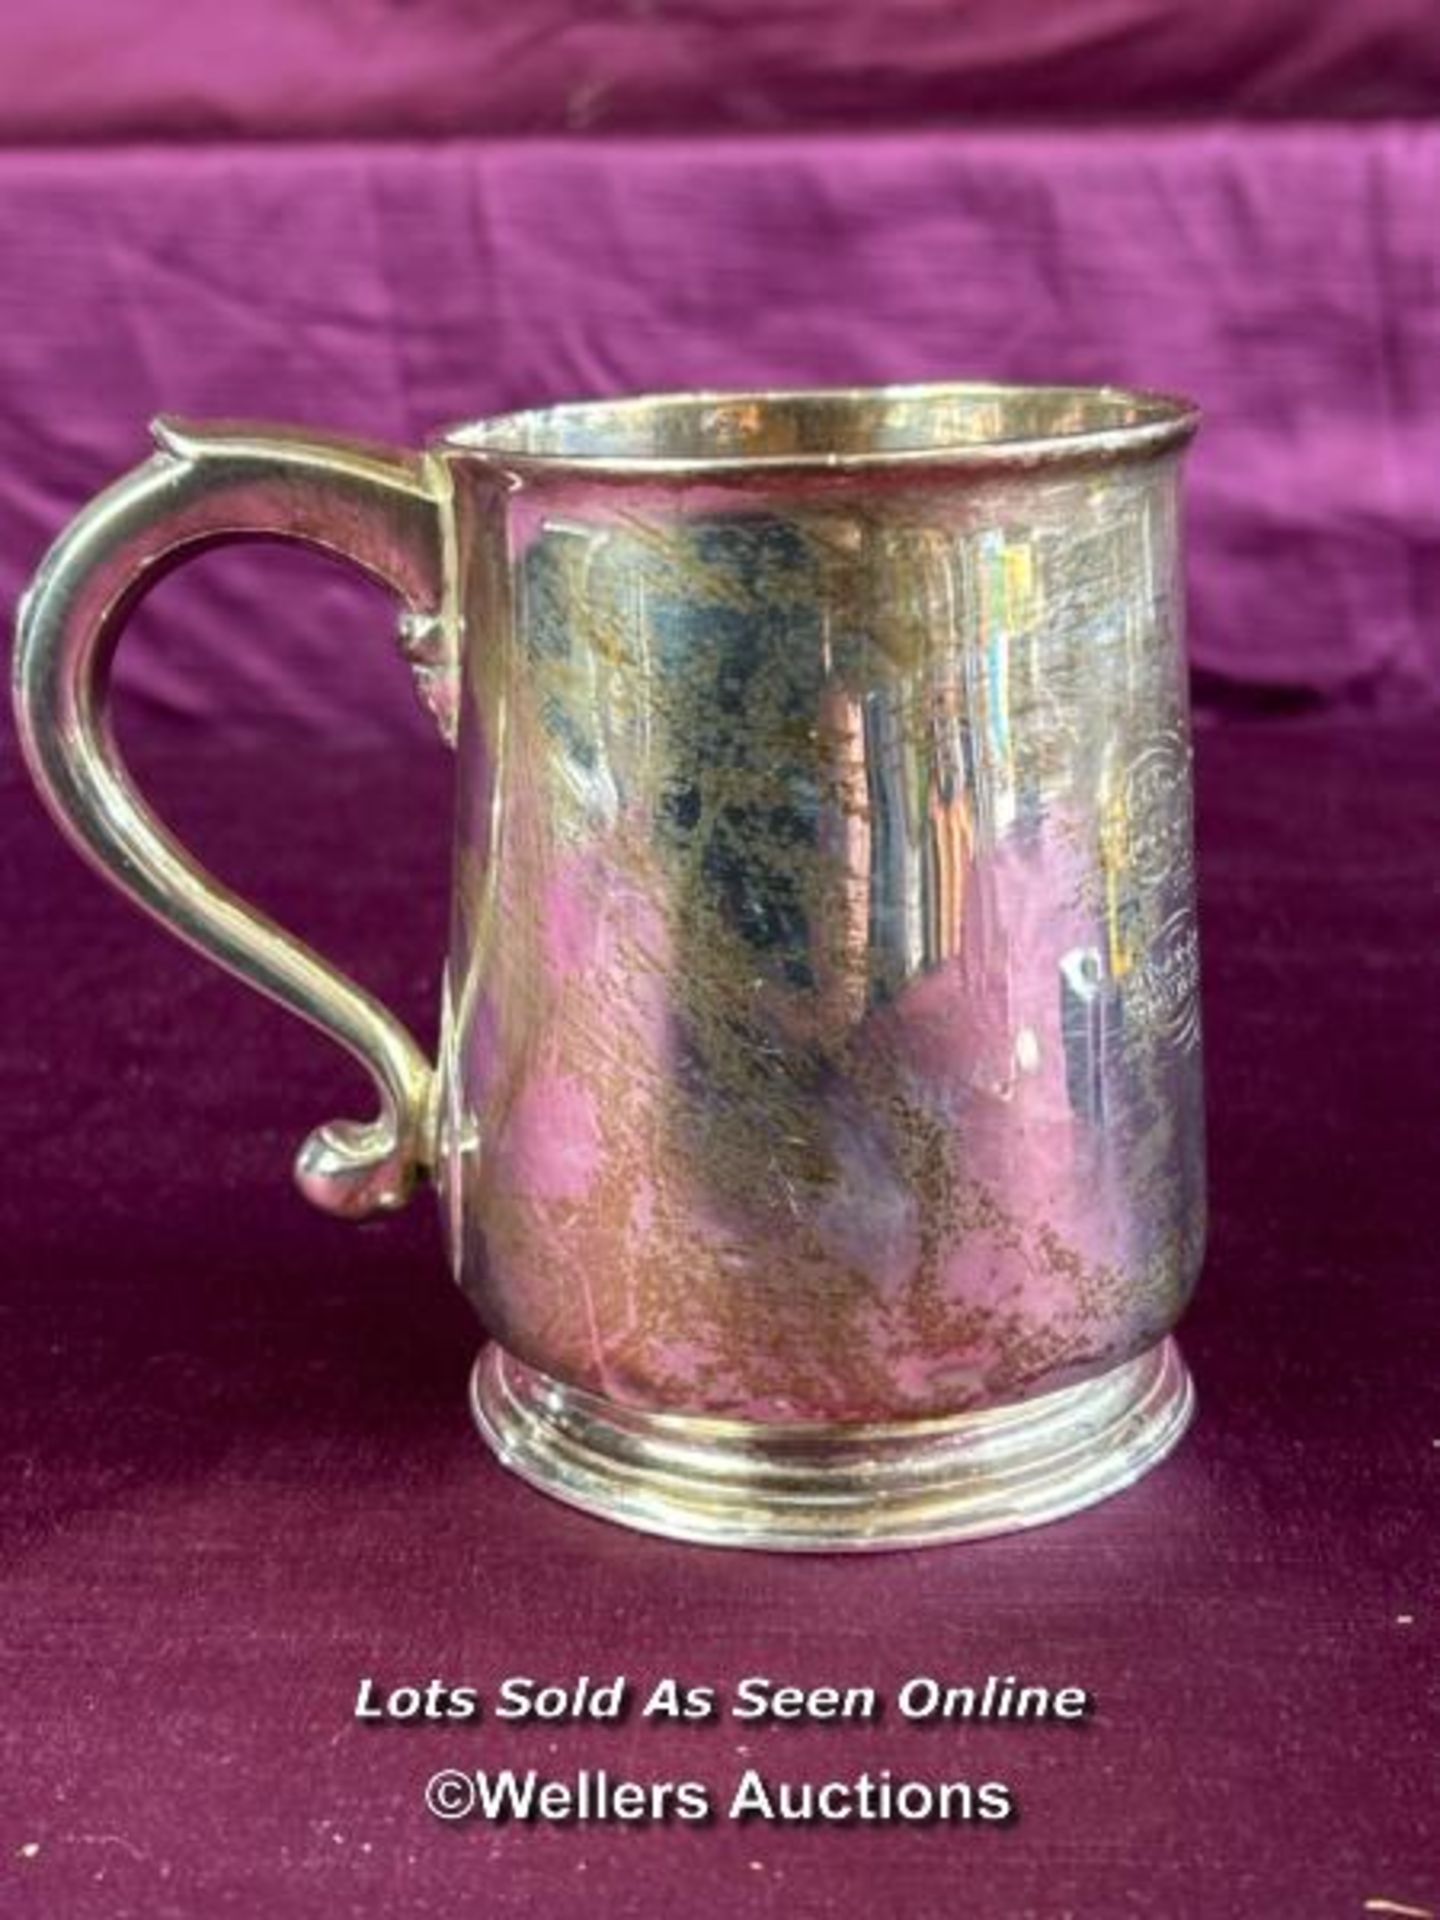 HALLMARKED SILVER TANKARD, DATED 1868, HEIGHT 10.7CM, WEIGHT 277GMS - Image 2 of 4